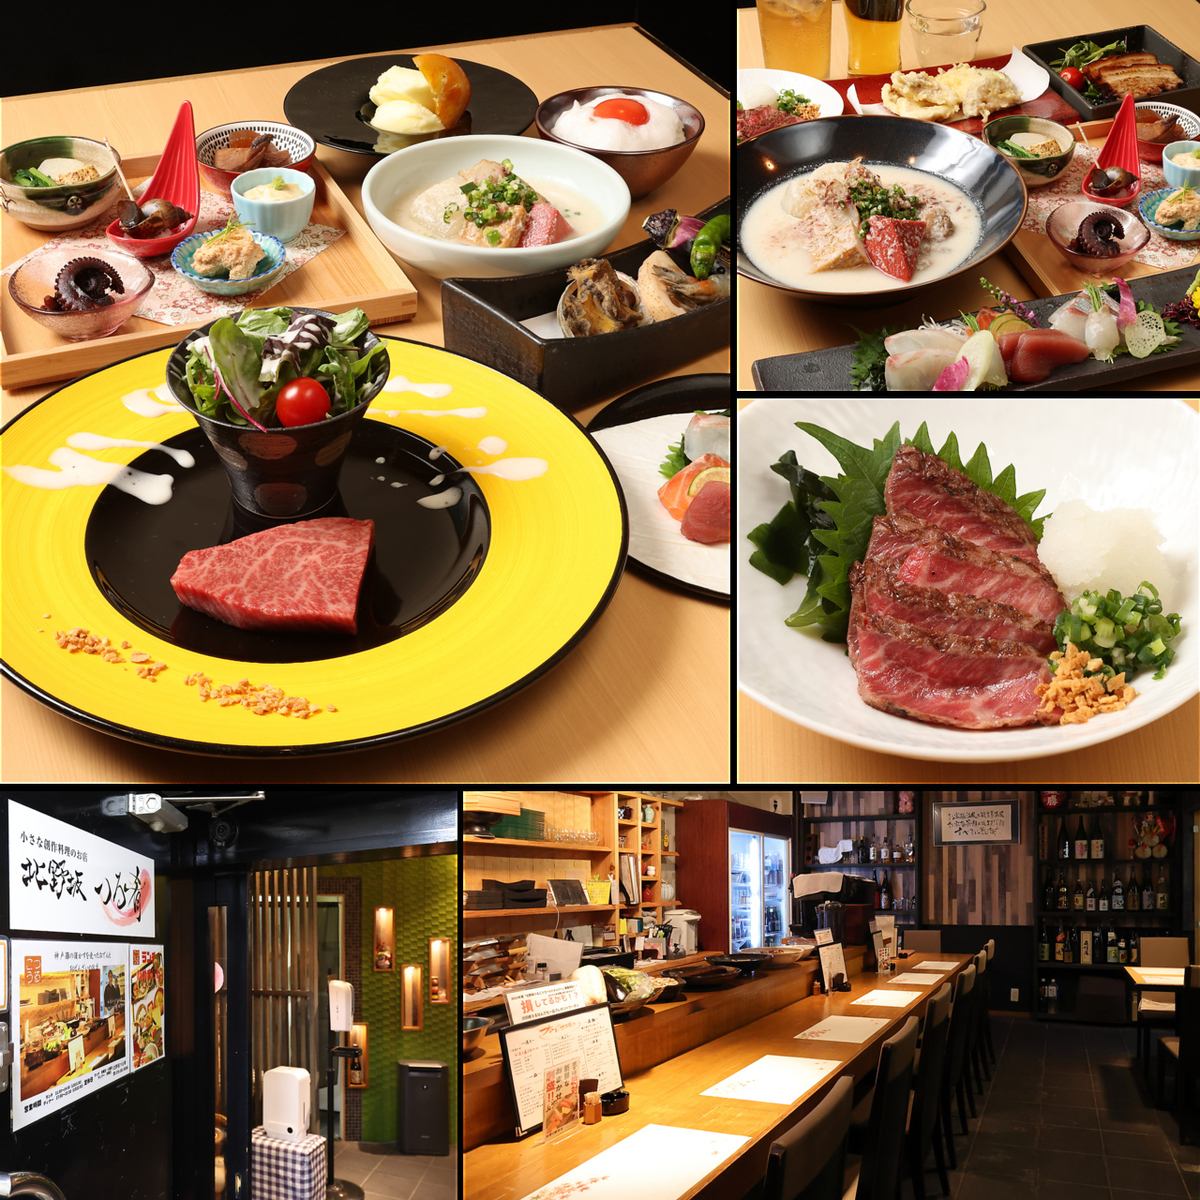 Enjoy a heart-warming, high-quality Japanese experience at our restaurant.